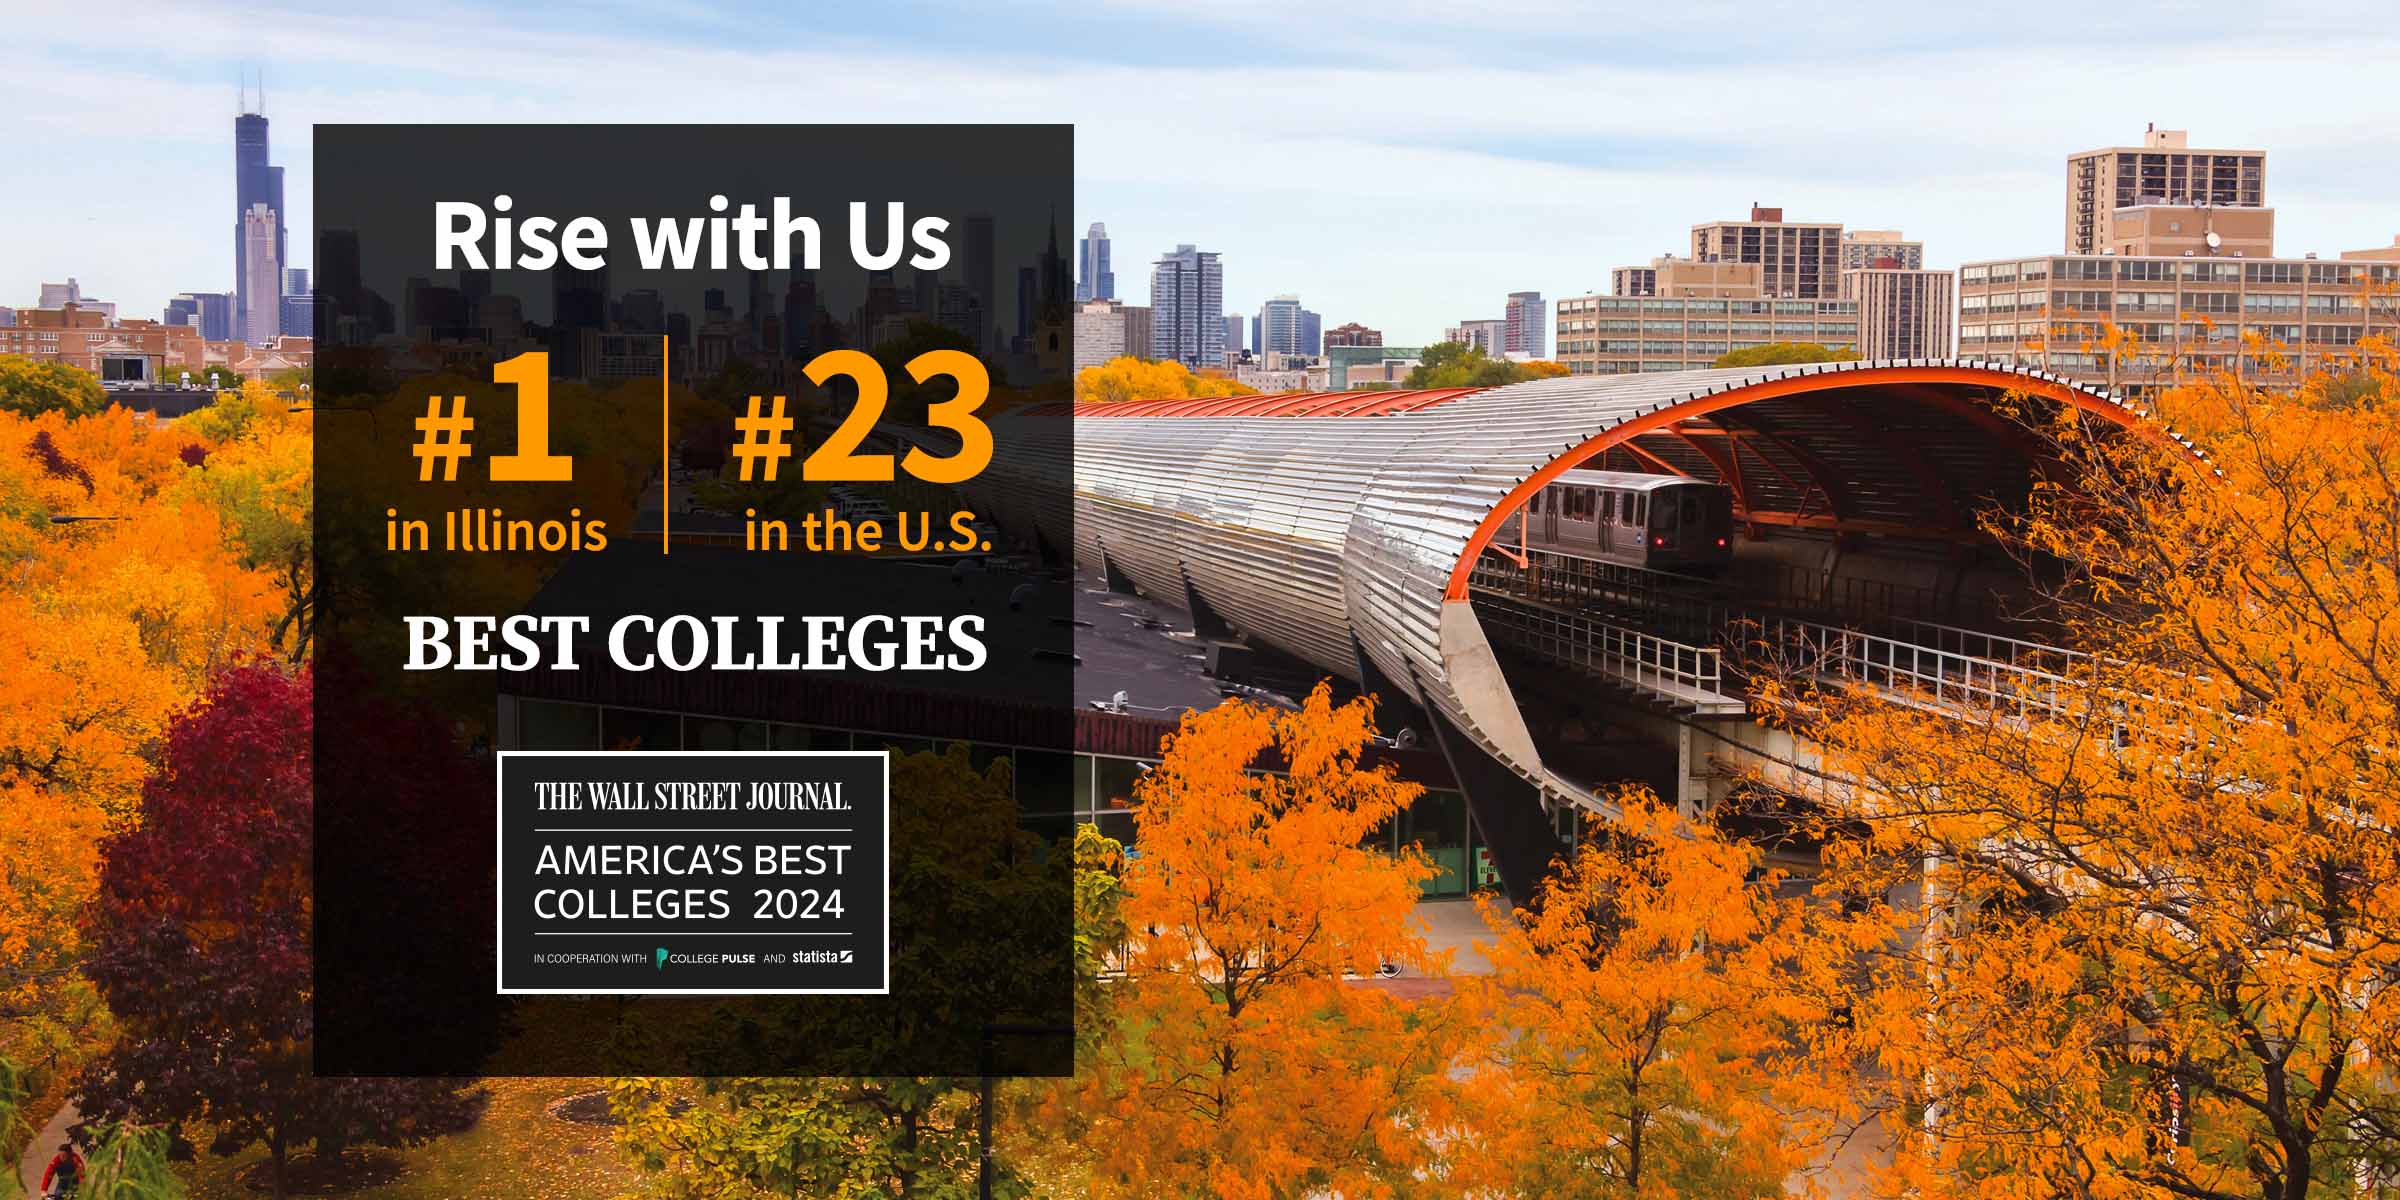 Campus image with overlay saying Rise with Us - #1 in Illinois | #23 in the U.S. Best Colleges